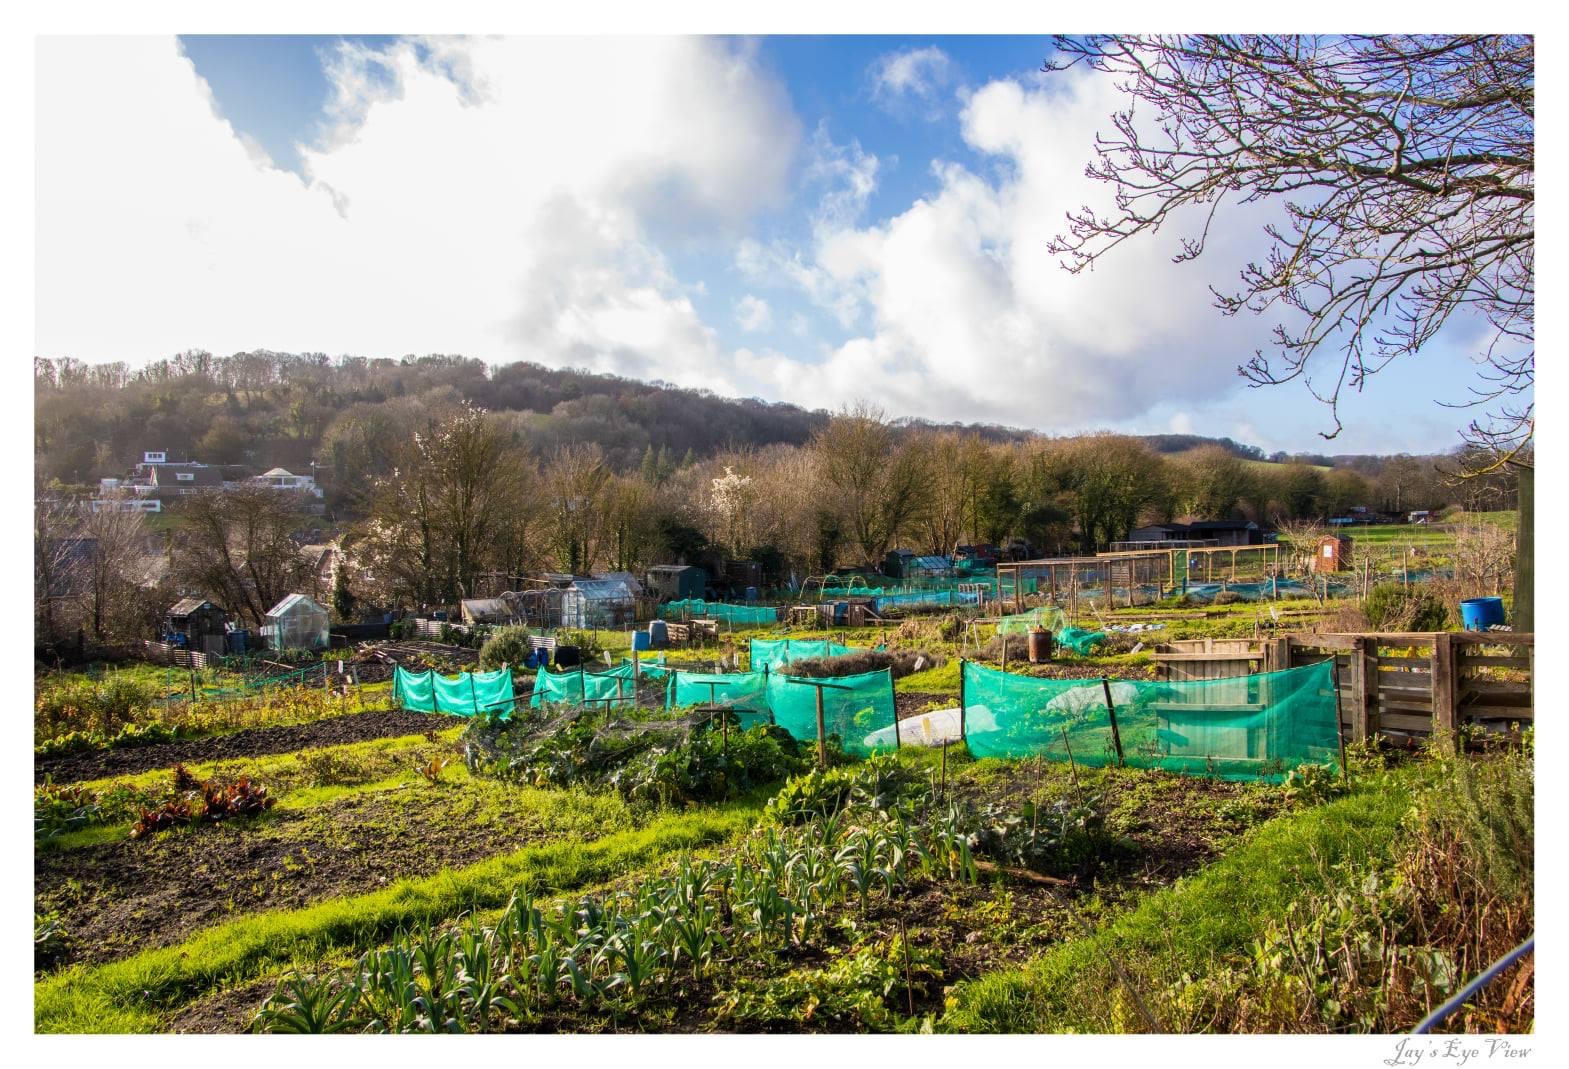 Temple Ewell Allotments